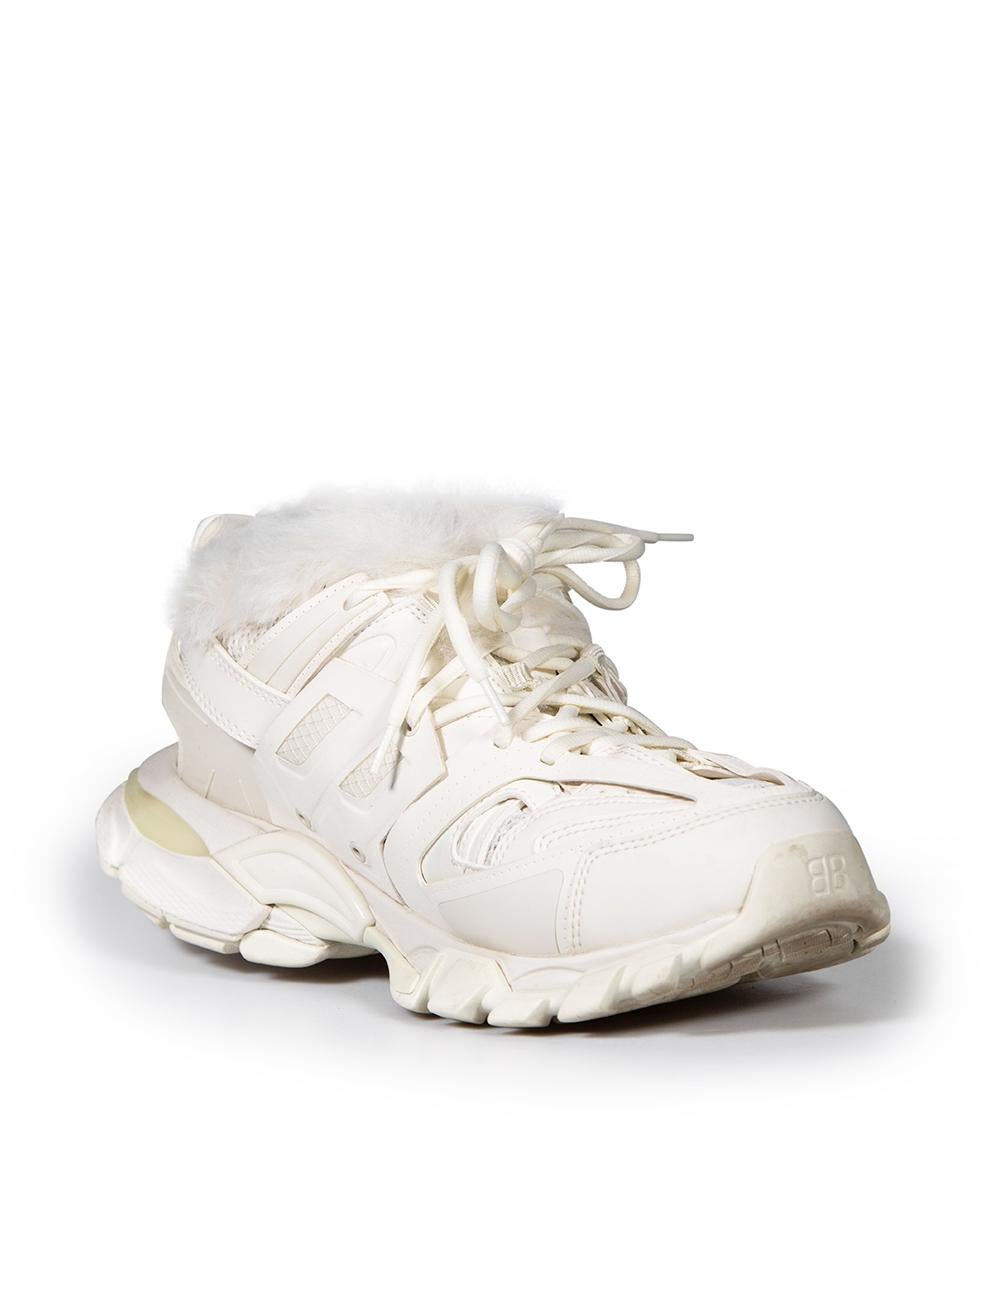 CONDITION is Good. General wear to trainers is evident. Moderate signs of wear to the faux fur lining which is compressed or matted in places. Some scuffing and discolouration can also be seen through the mid and outer soles of this used Balenciaga